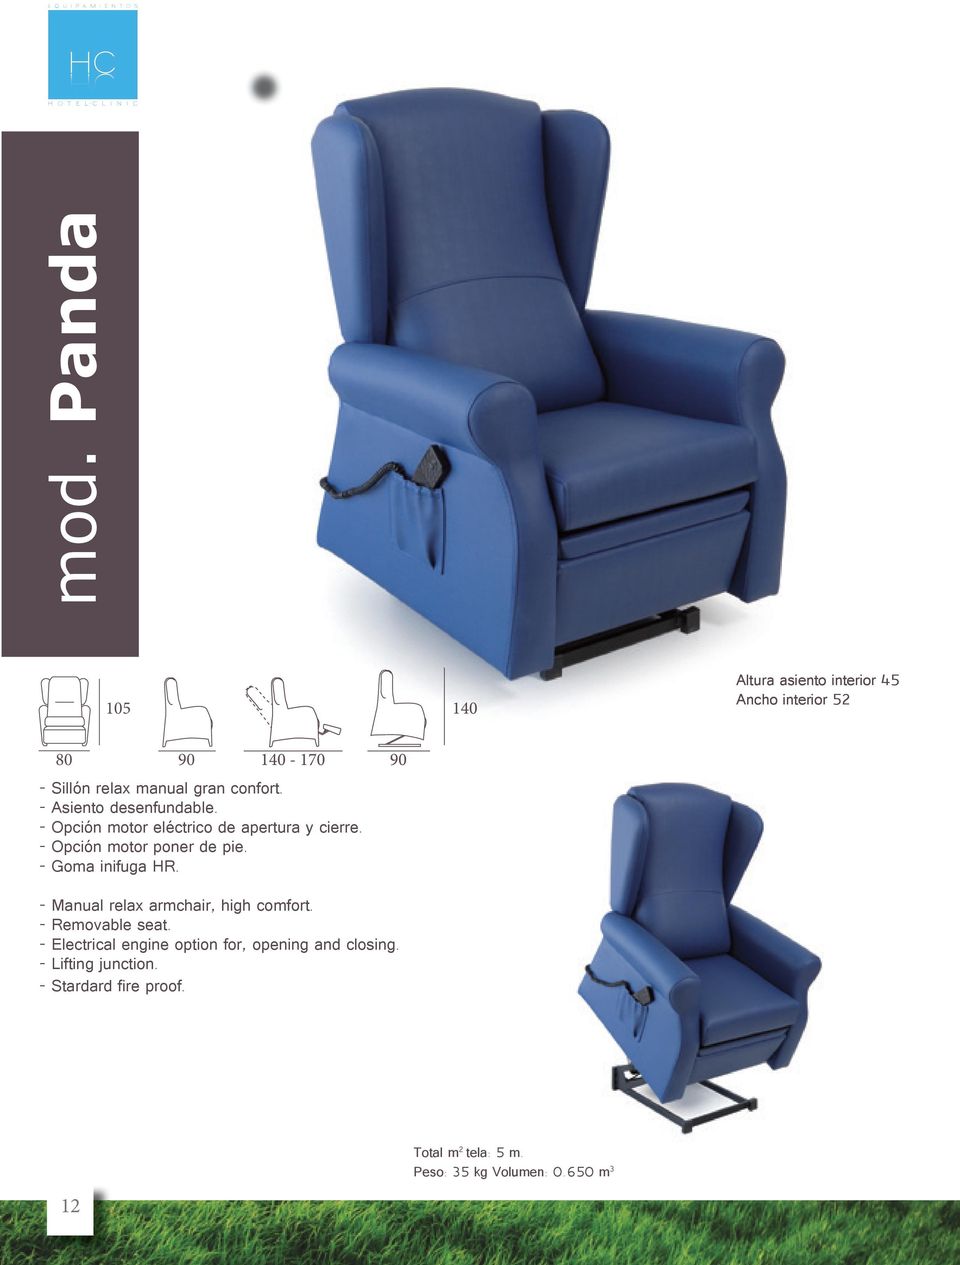 - Goma inifuga HR. - Manual relax armchair, high comfort. - Removable seat.